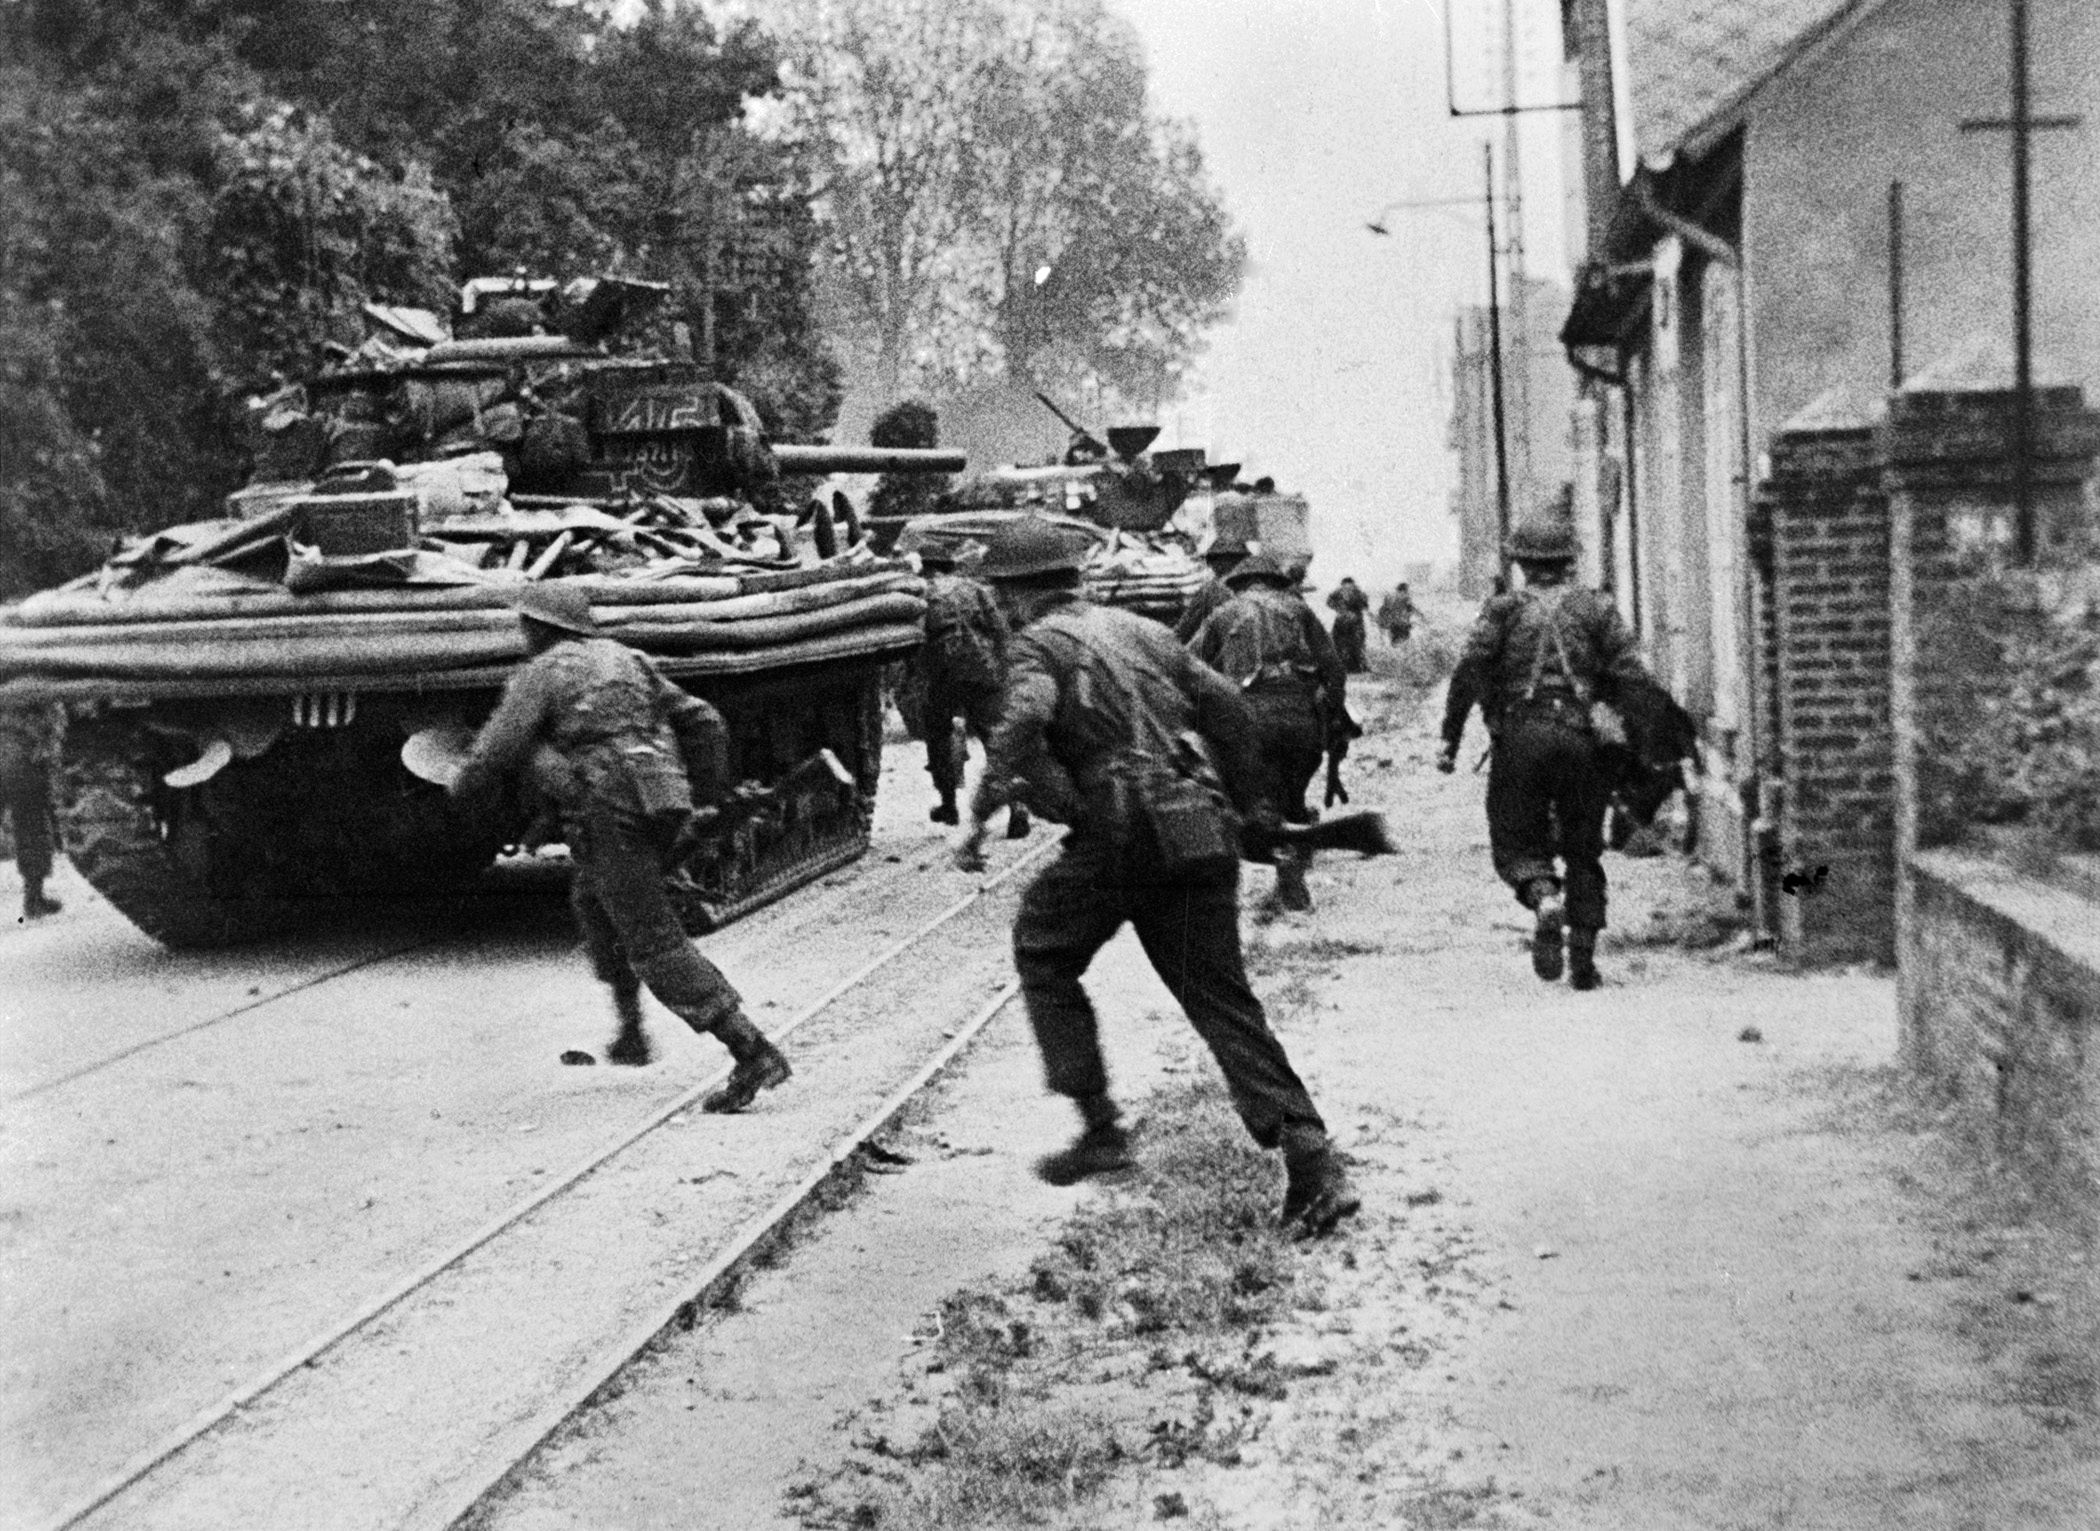 No. 4 Commando engages in house-to-house fighting with the Germans at Riva Bella, near Ouistreham. Sherman DD tanks of B Squadron, 13/18th Royal Hussars are providing fire support and cover.